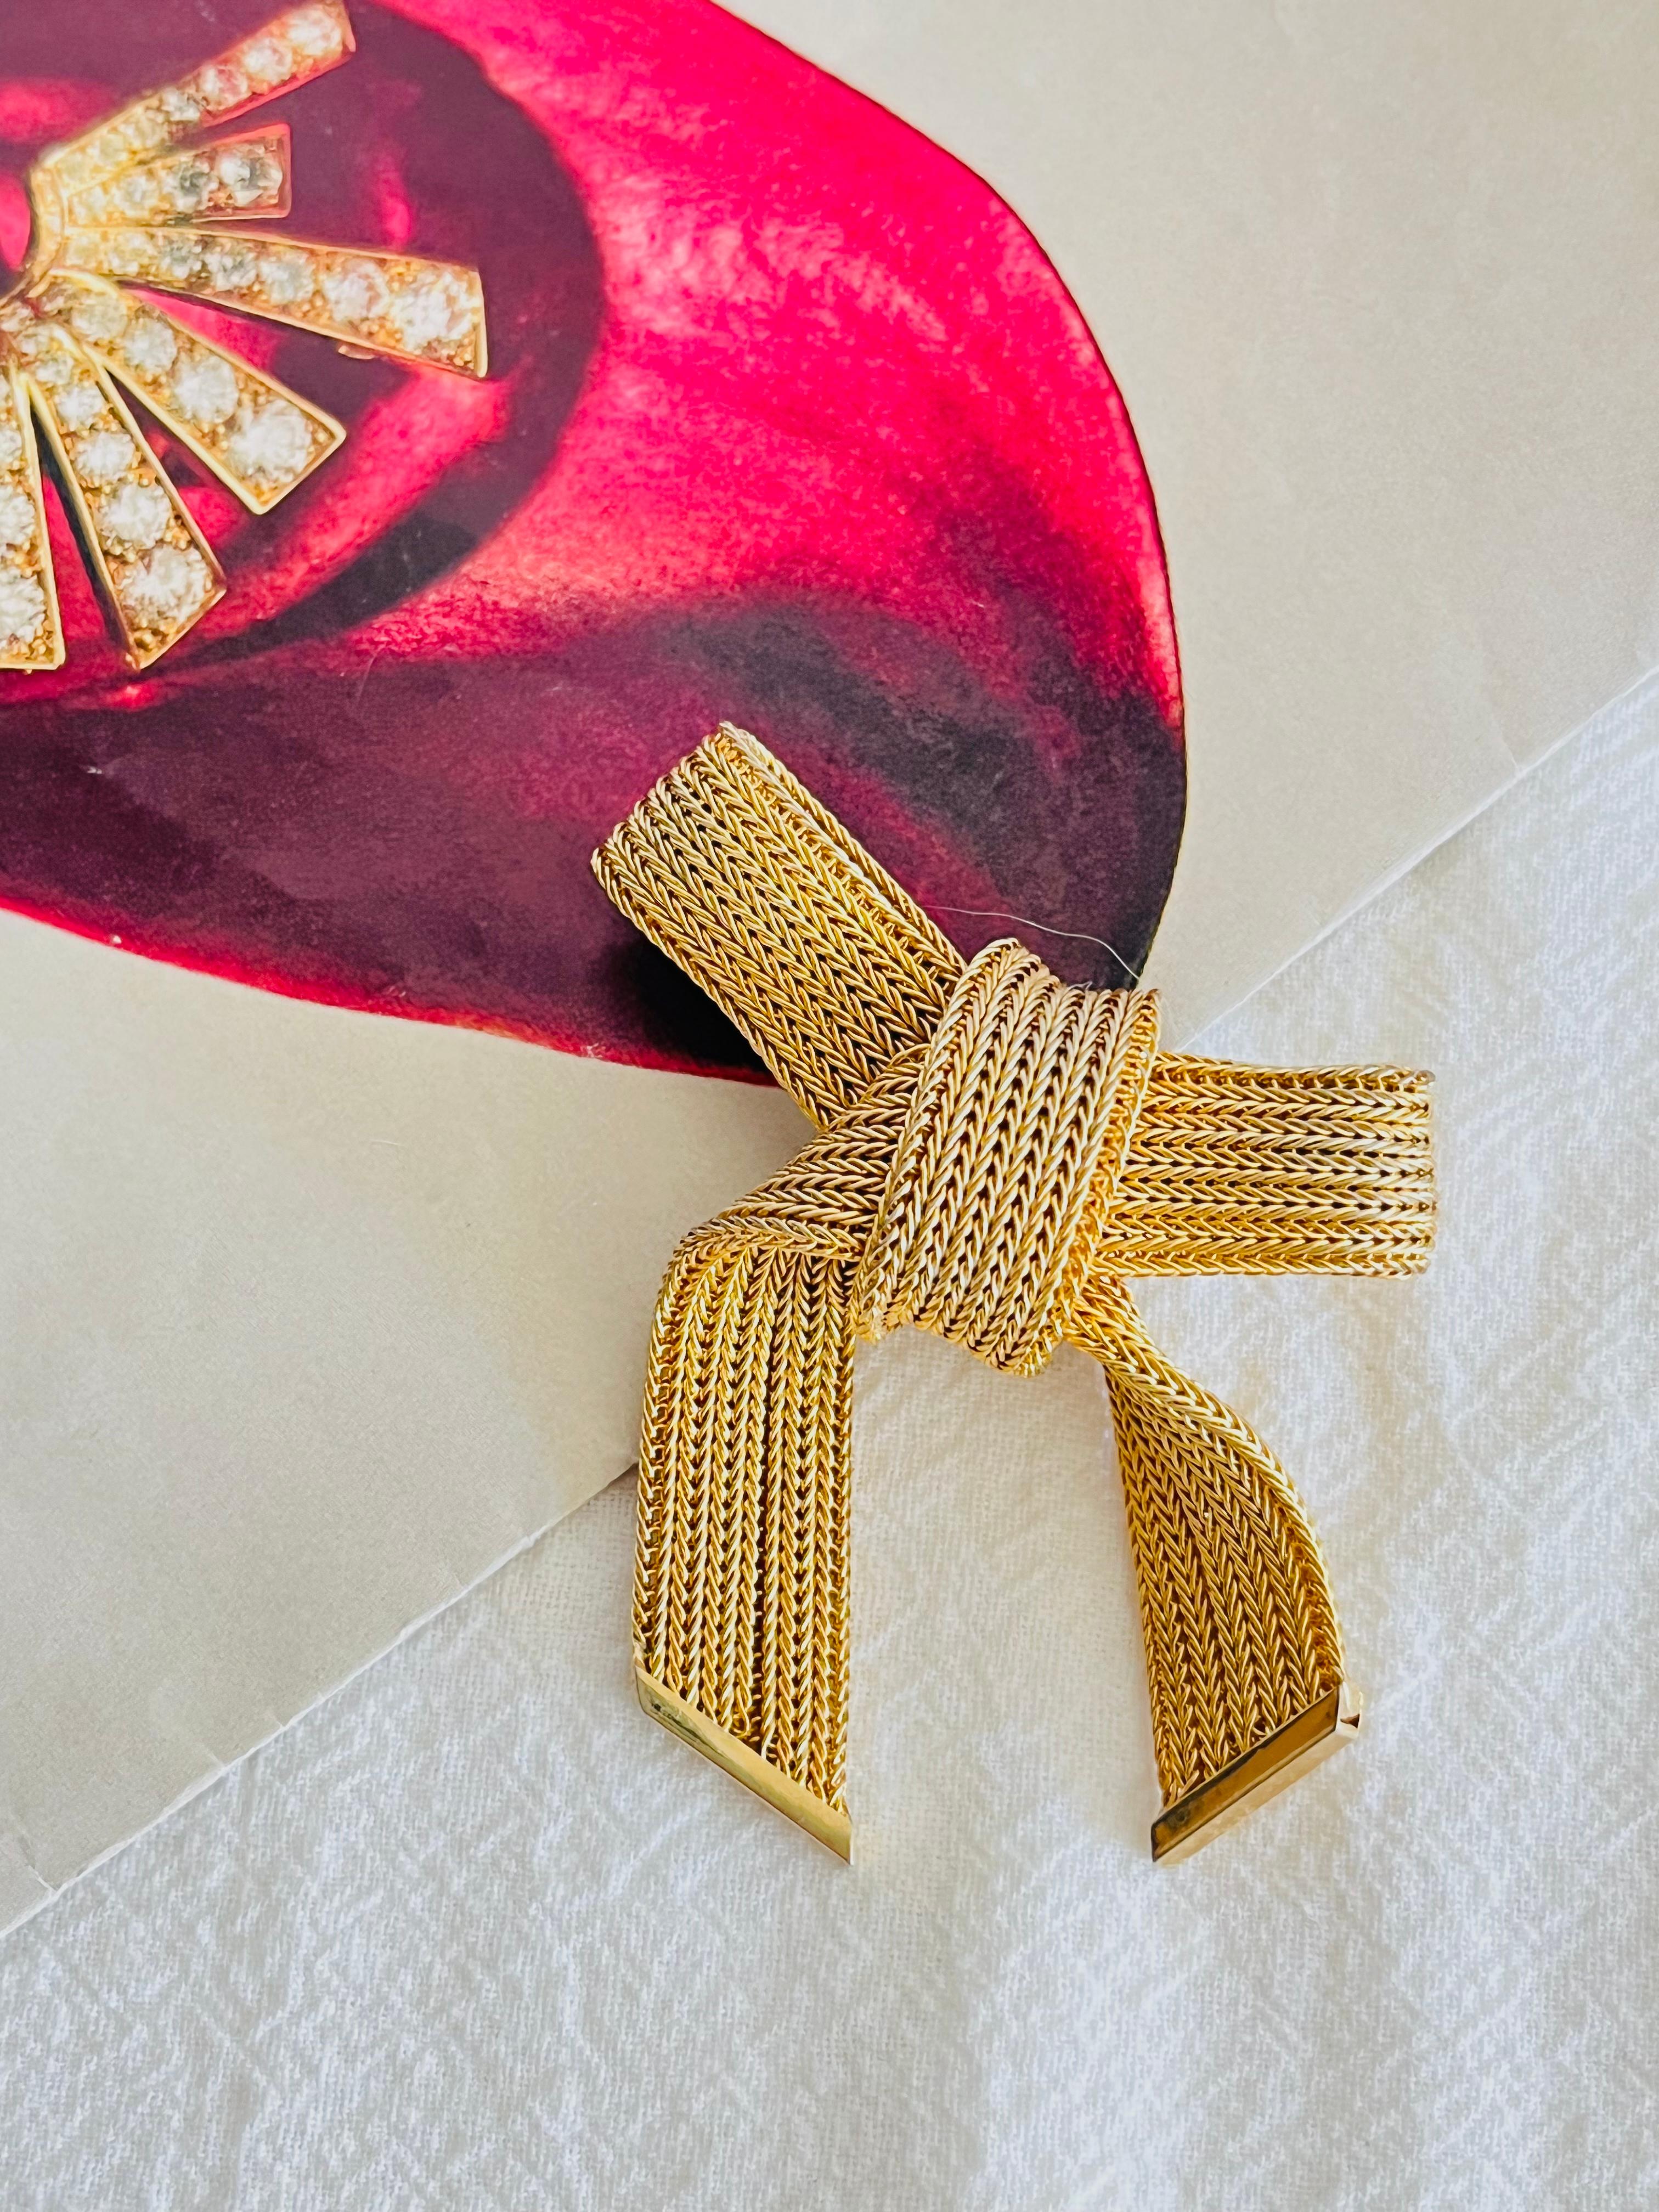 Very good condition. Signed at back. 100% genuine.

A unique piece. This is gold plated stylised brooch.

Safety-catch pin closure.

Size: 5.2 cm x 6.5 cm.

Weight: 26.0 g.

_ _ _

Great for everyday wear. Come with velvet pouch and beautiful